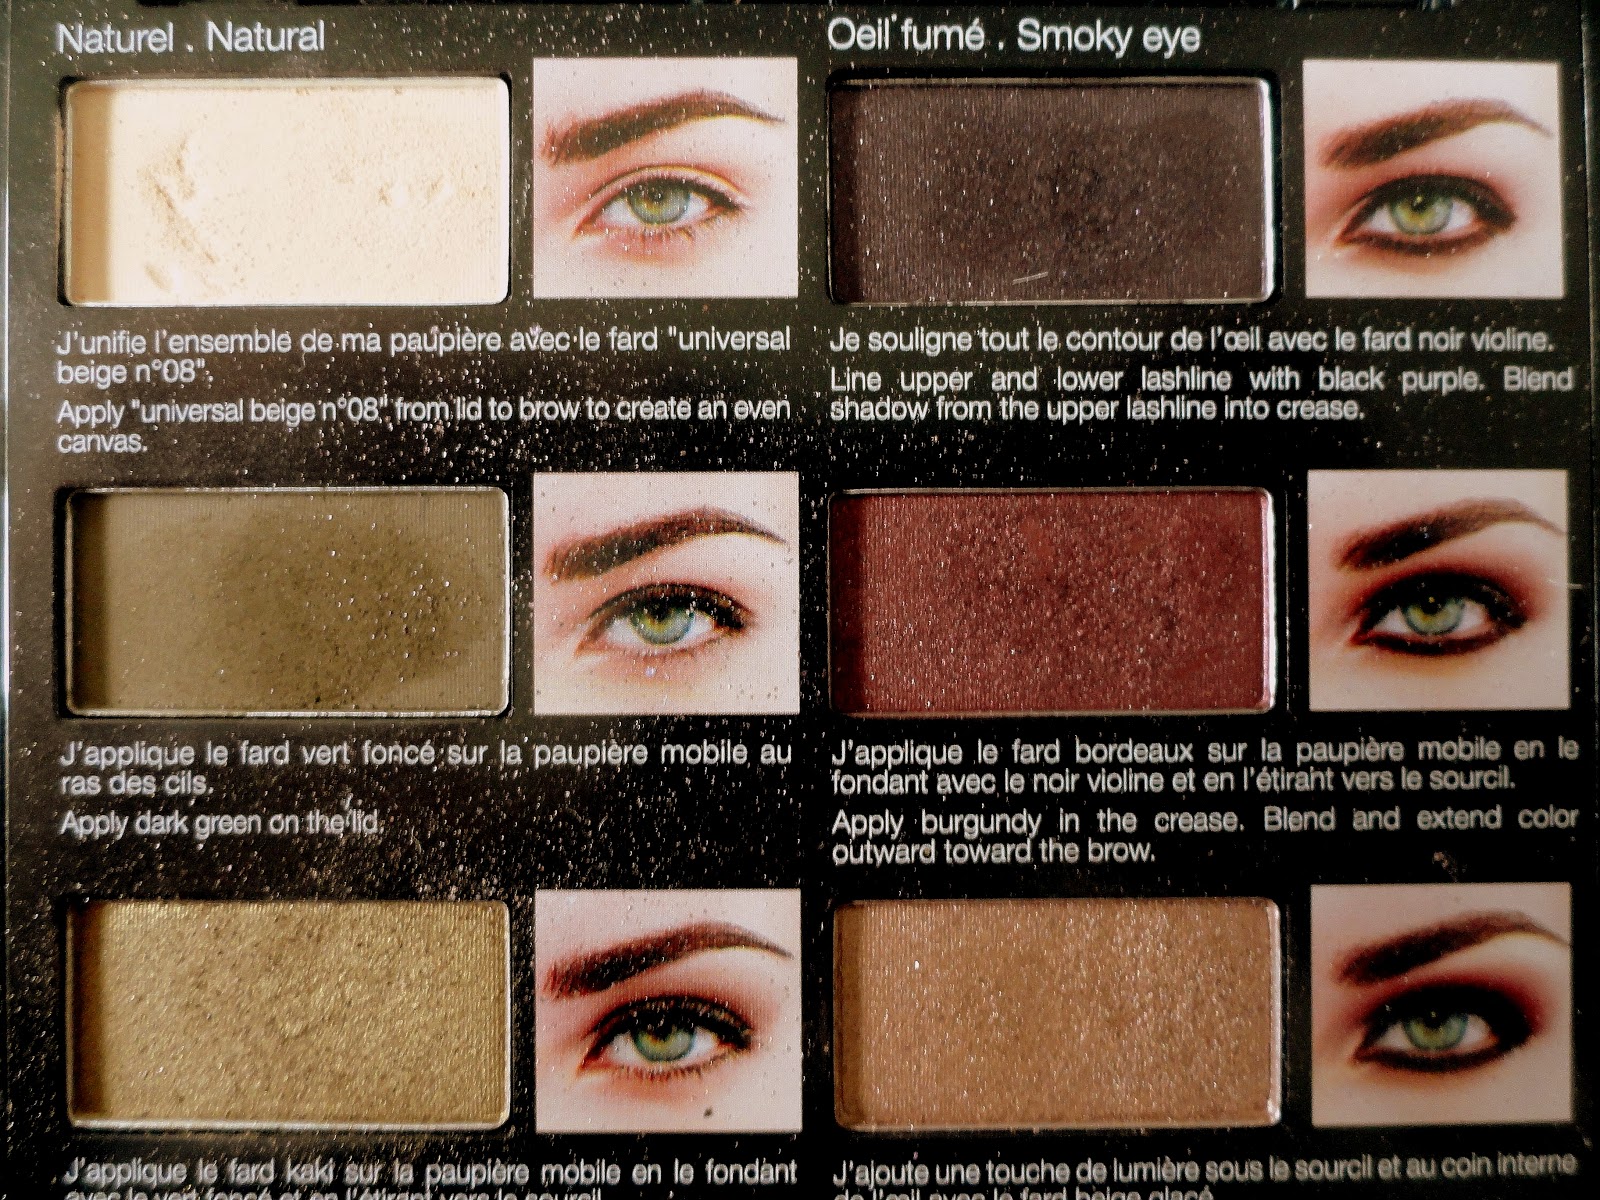 Maquillage yeux verts : Comment les maquiller - SEPHORA COLLECTION